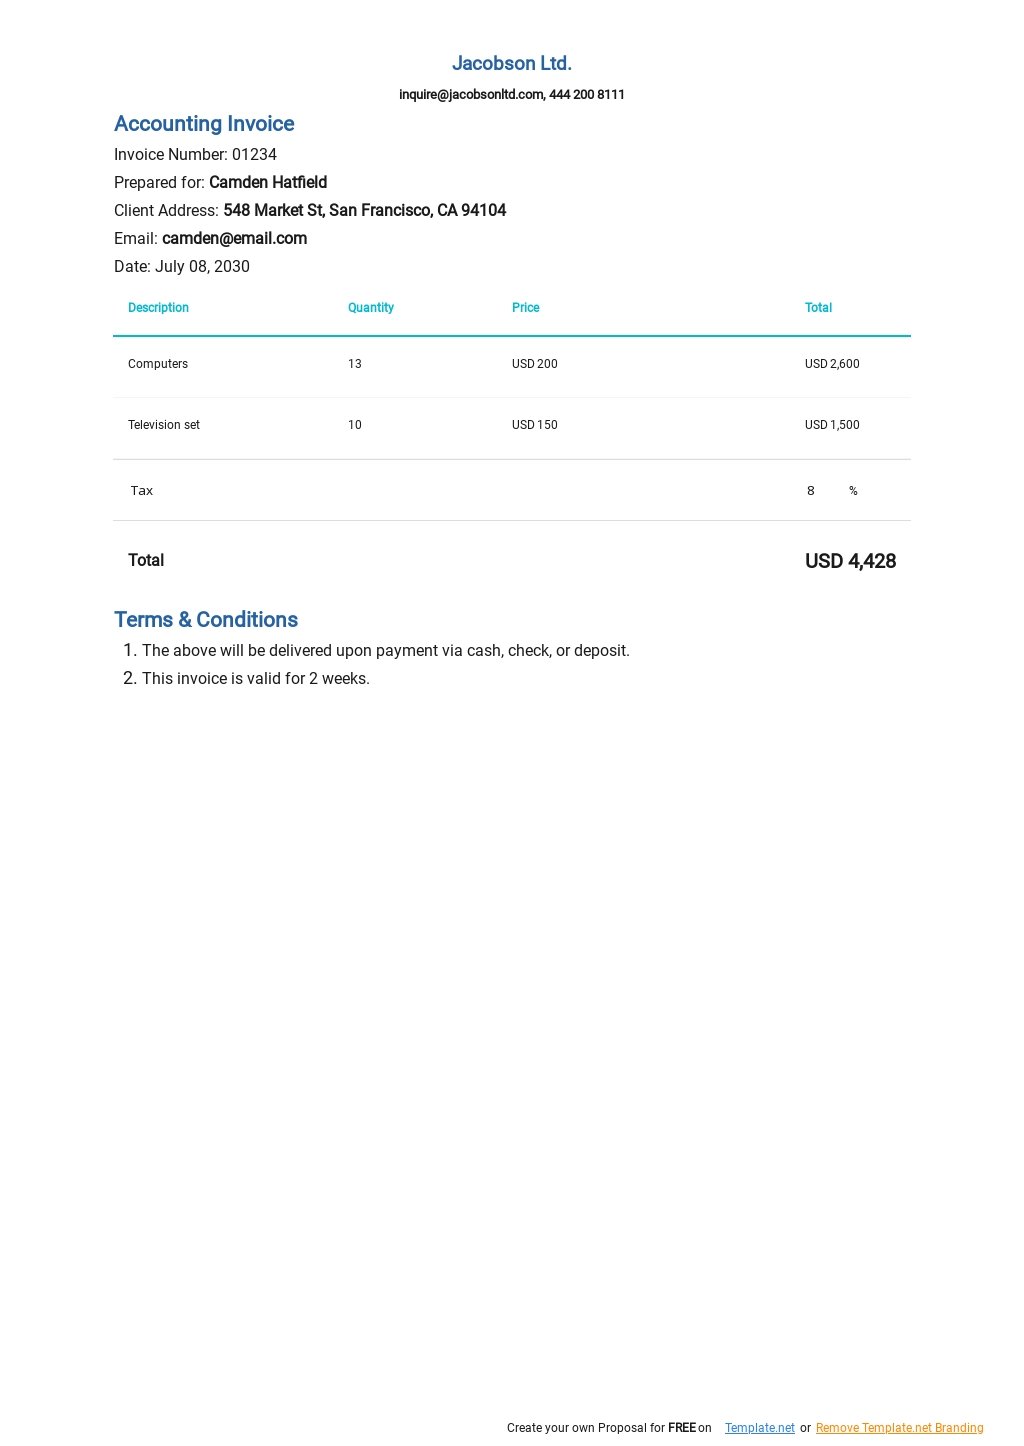 google sheets commercial invoice template